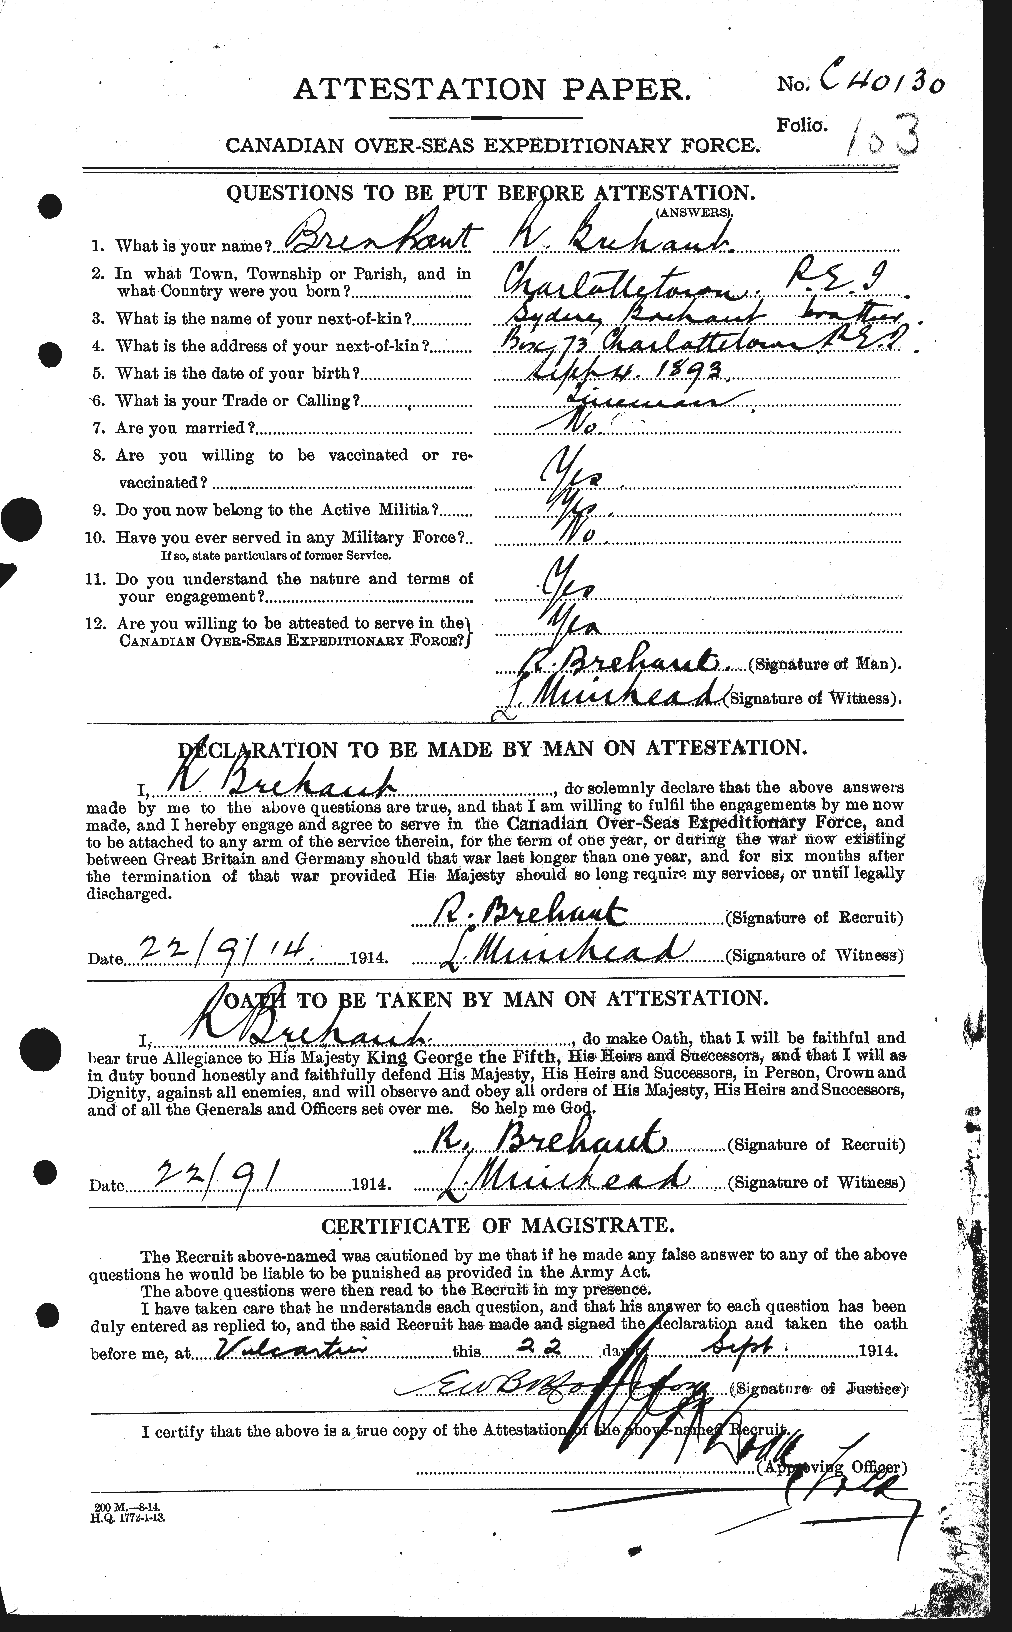 Personnel Records of the First World War - CEF 263620a